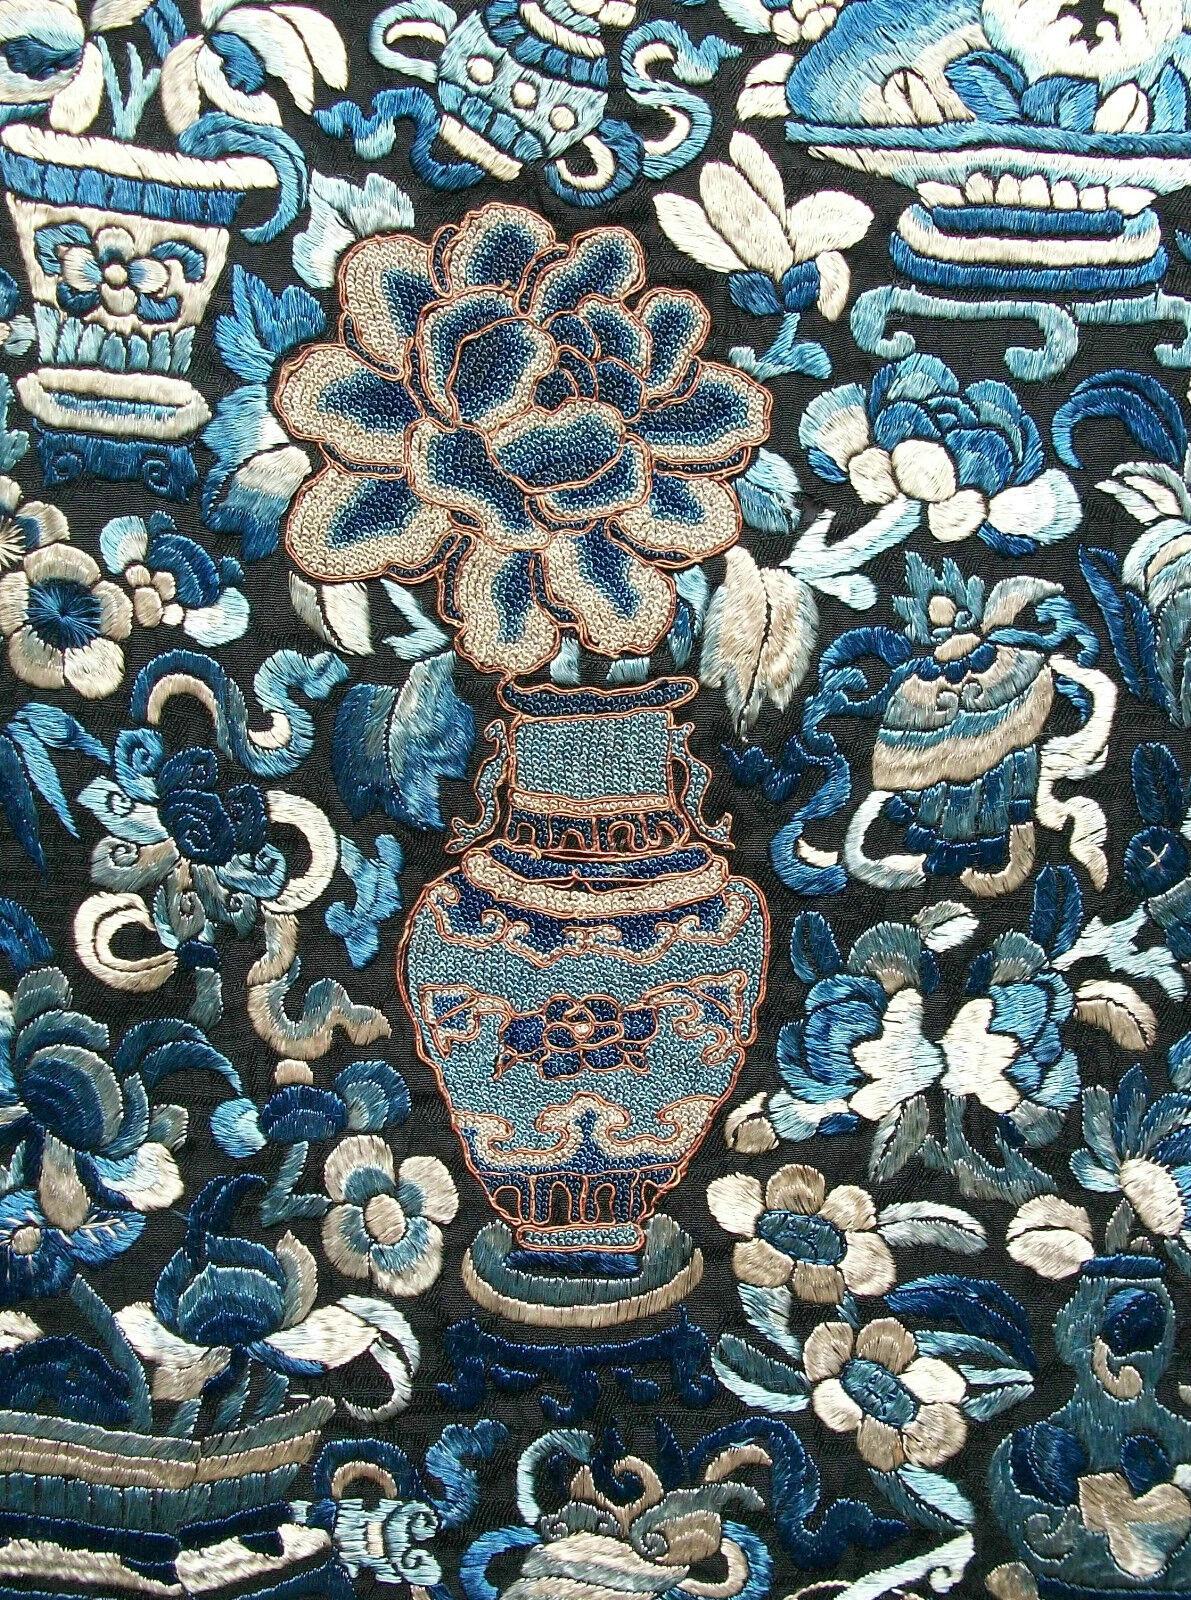 Antique fine quality - Qing Dynasty - forbidden or seed stitch silk embroidery panel - metallic and silk threads - densely packed embroidery on a light weight damask pattern silk - midnight blue/black in color - China - 19th century.

Fair antique